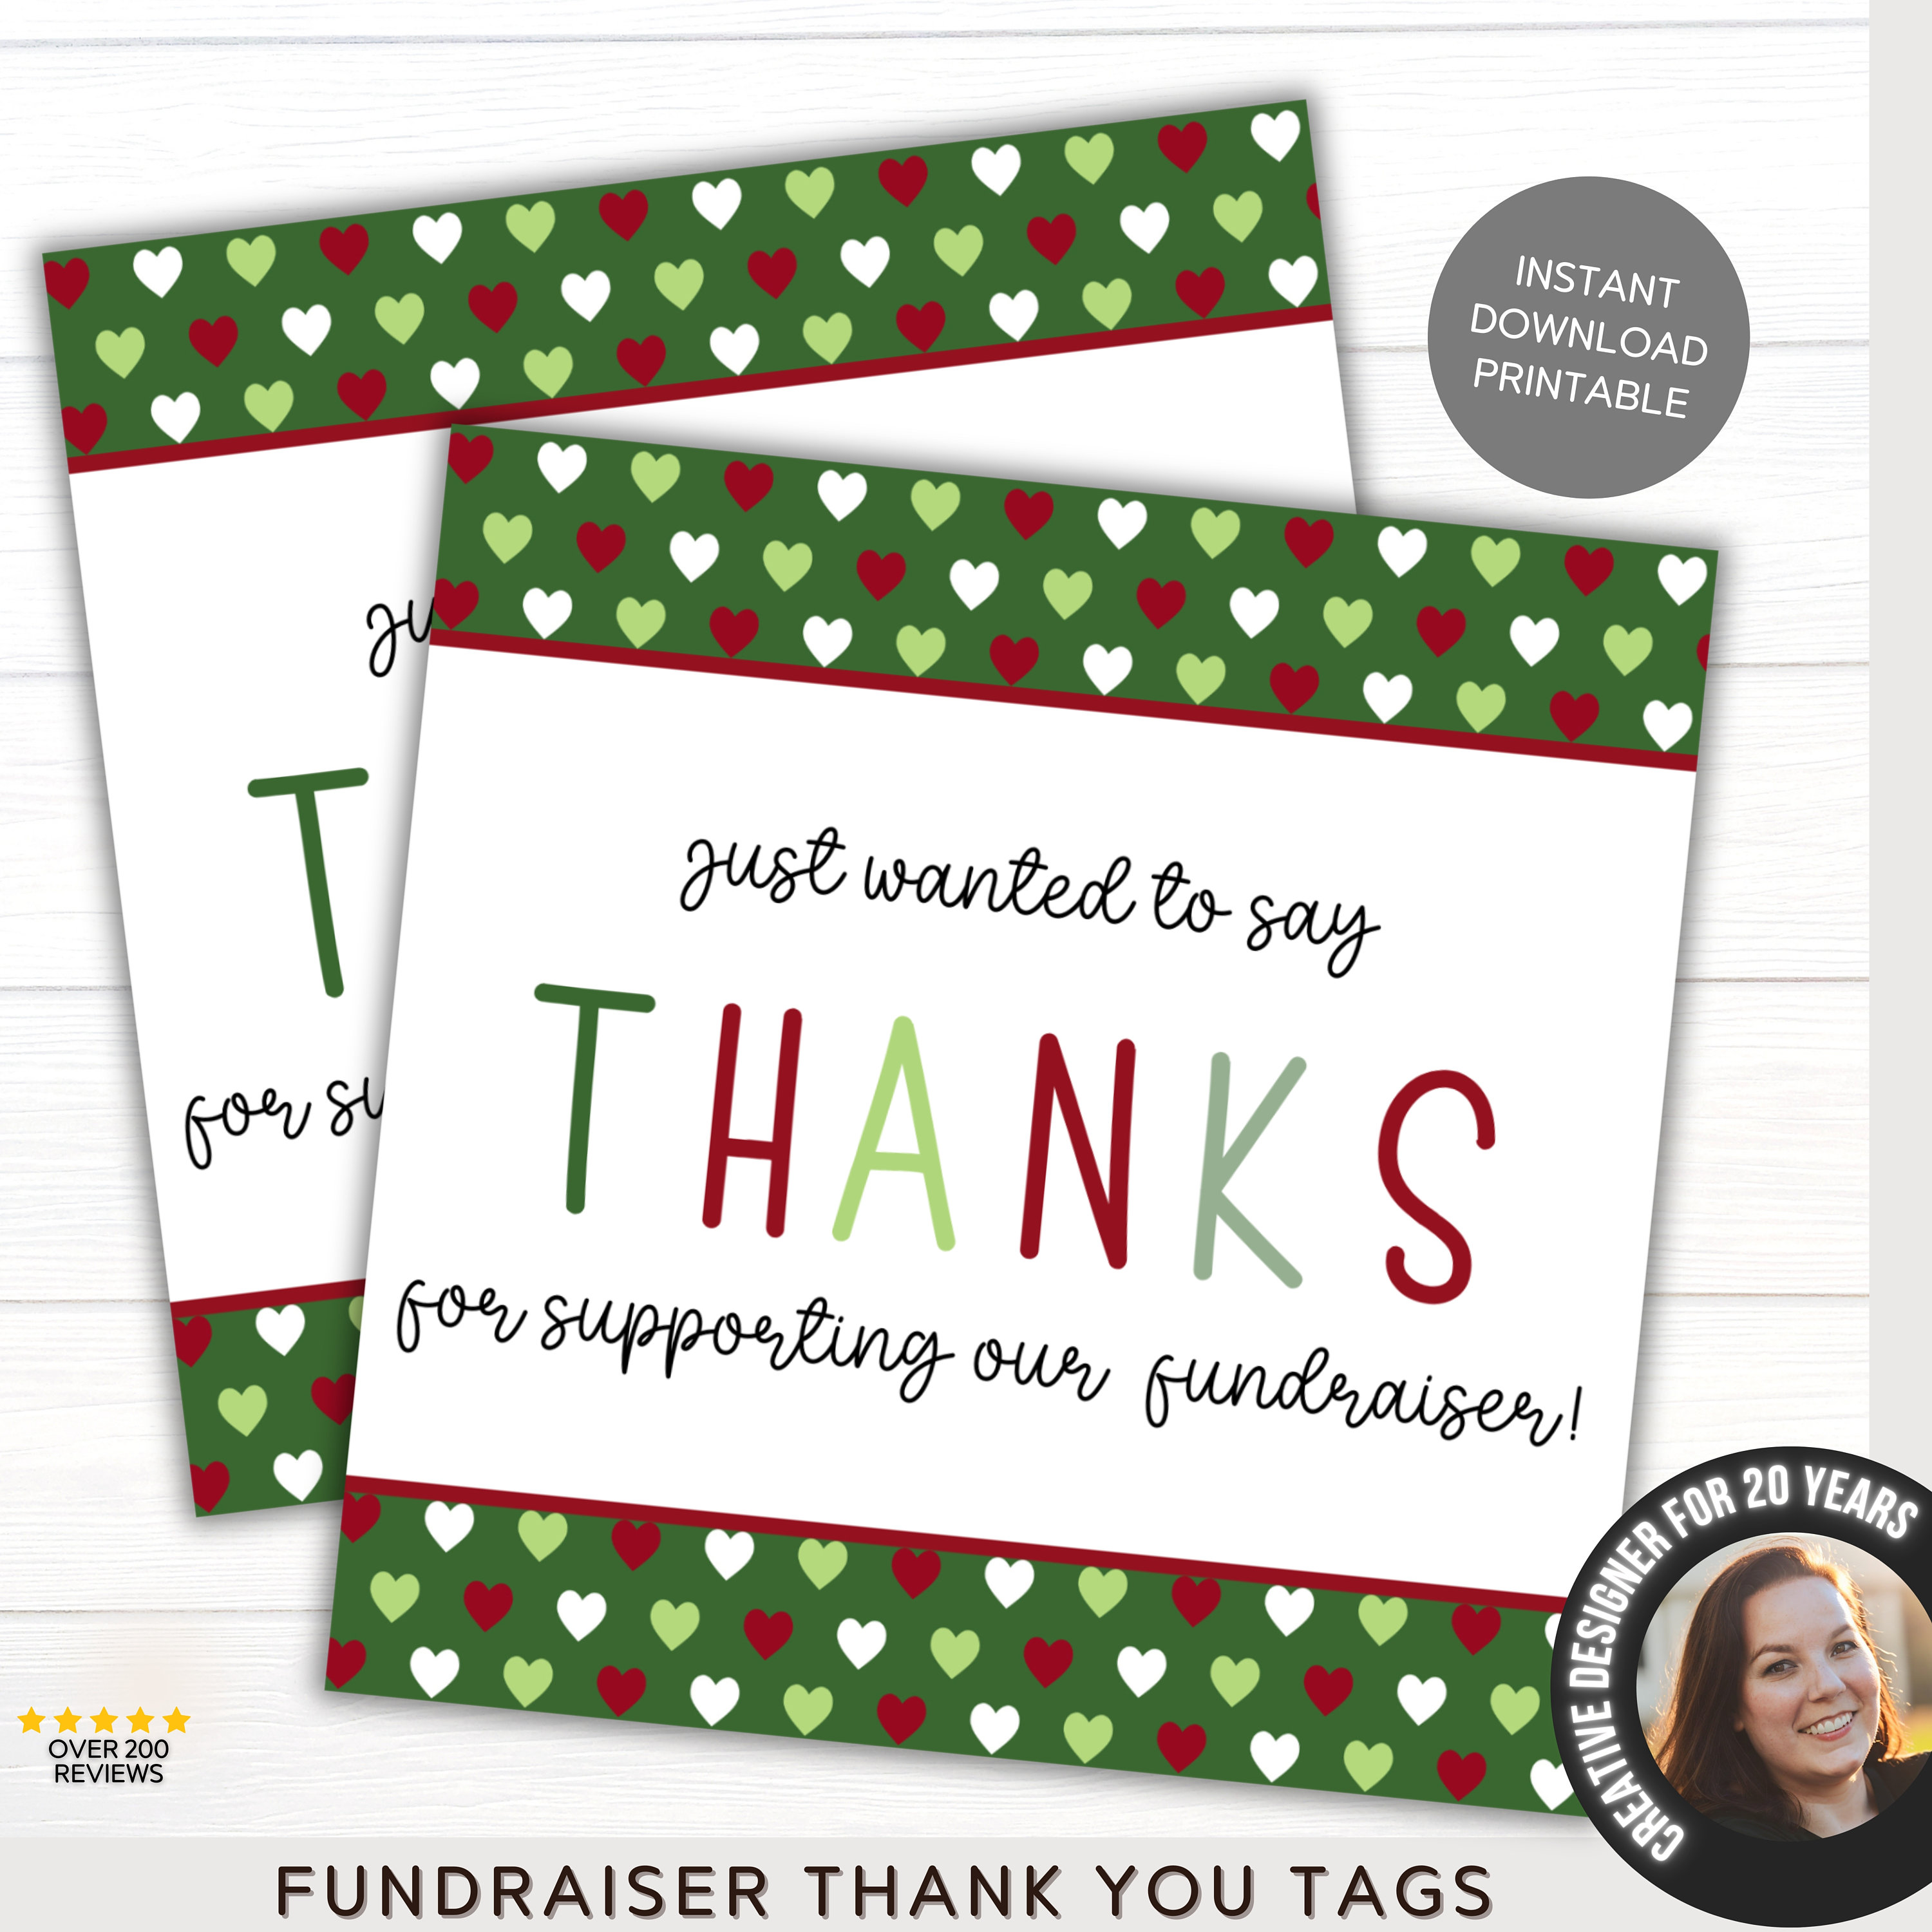 Chick fil a Thank you tag Customizable Template DIY